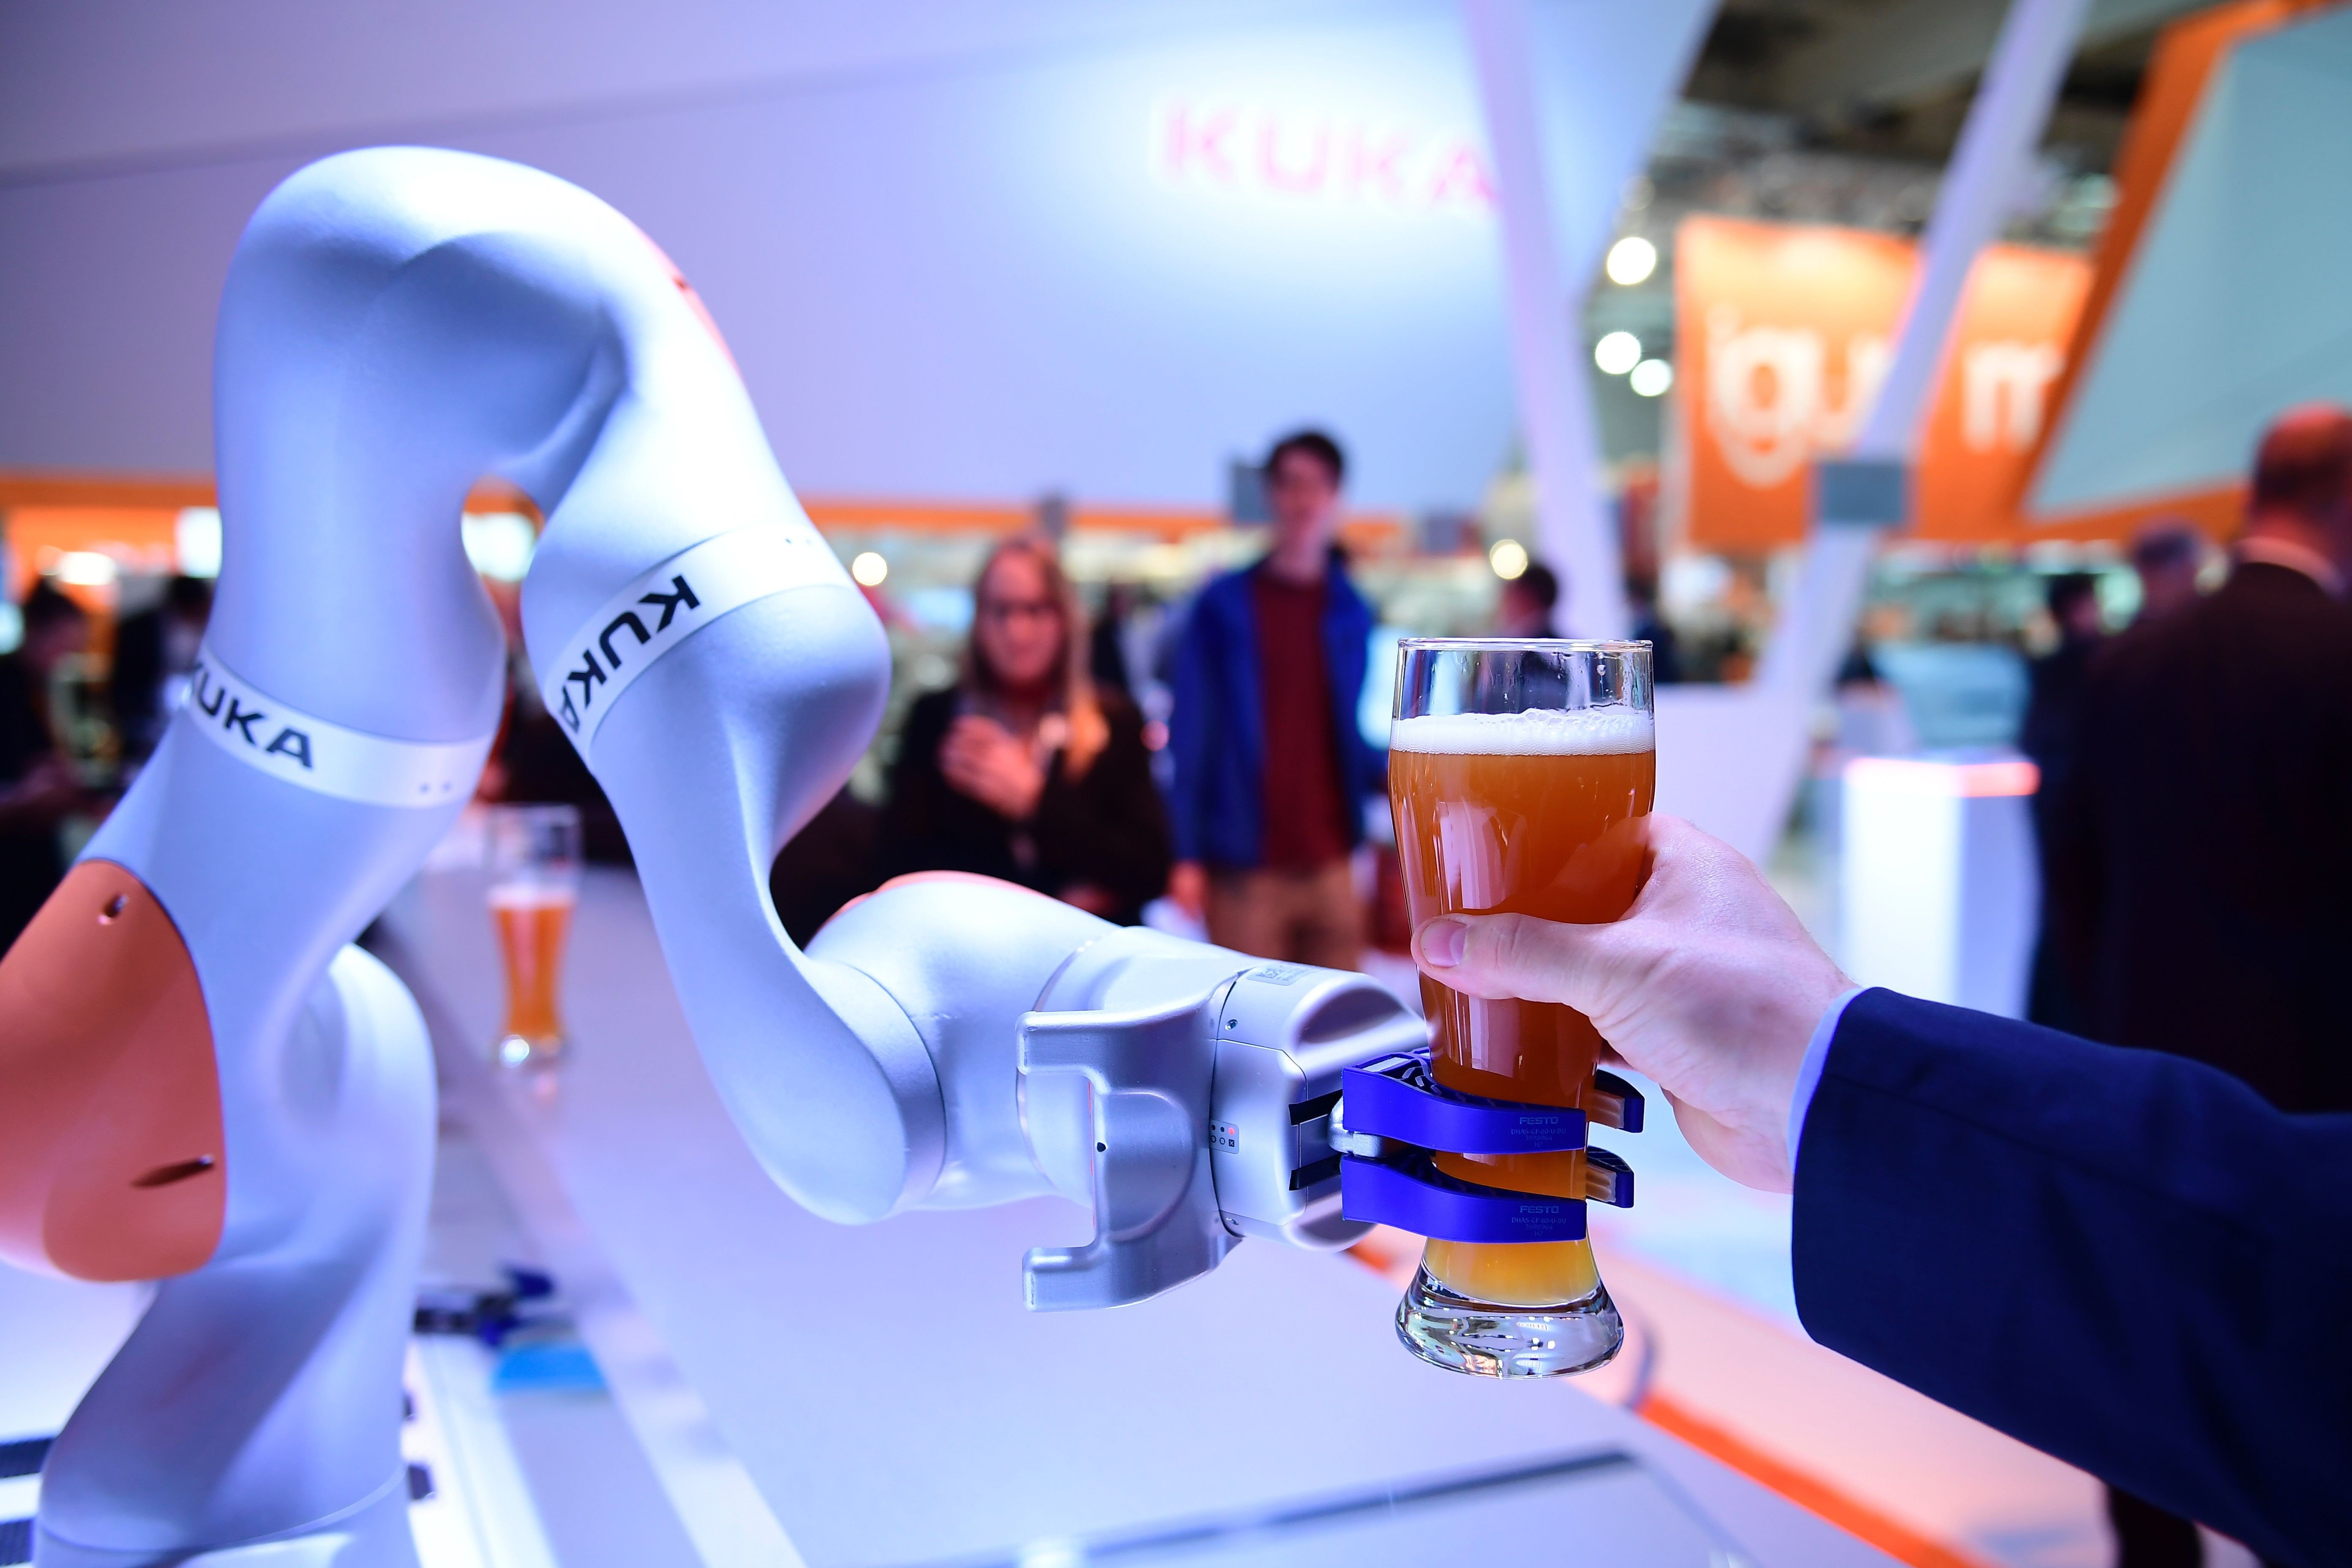 German robot Kuka eyes €1b sales in China by tapping parent's Midea network | South China Morning Post